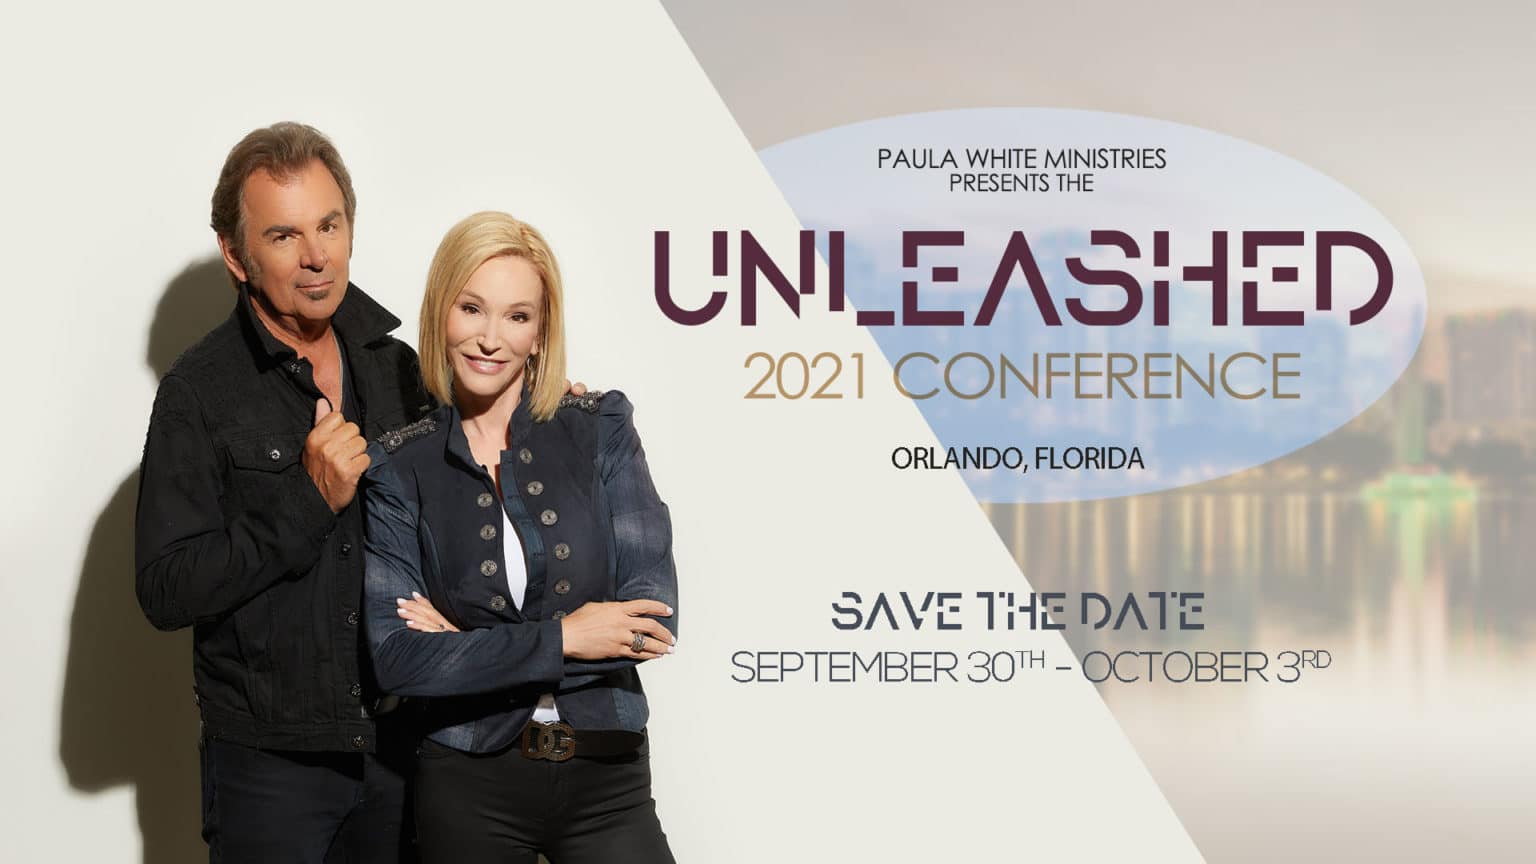 2021 Unleashed Conference SAVE THE DATE! Paula White Ministries